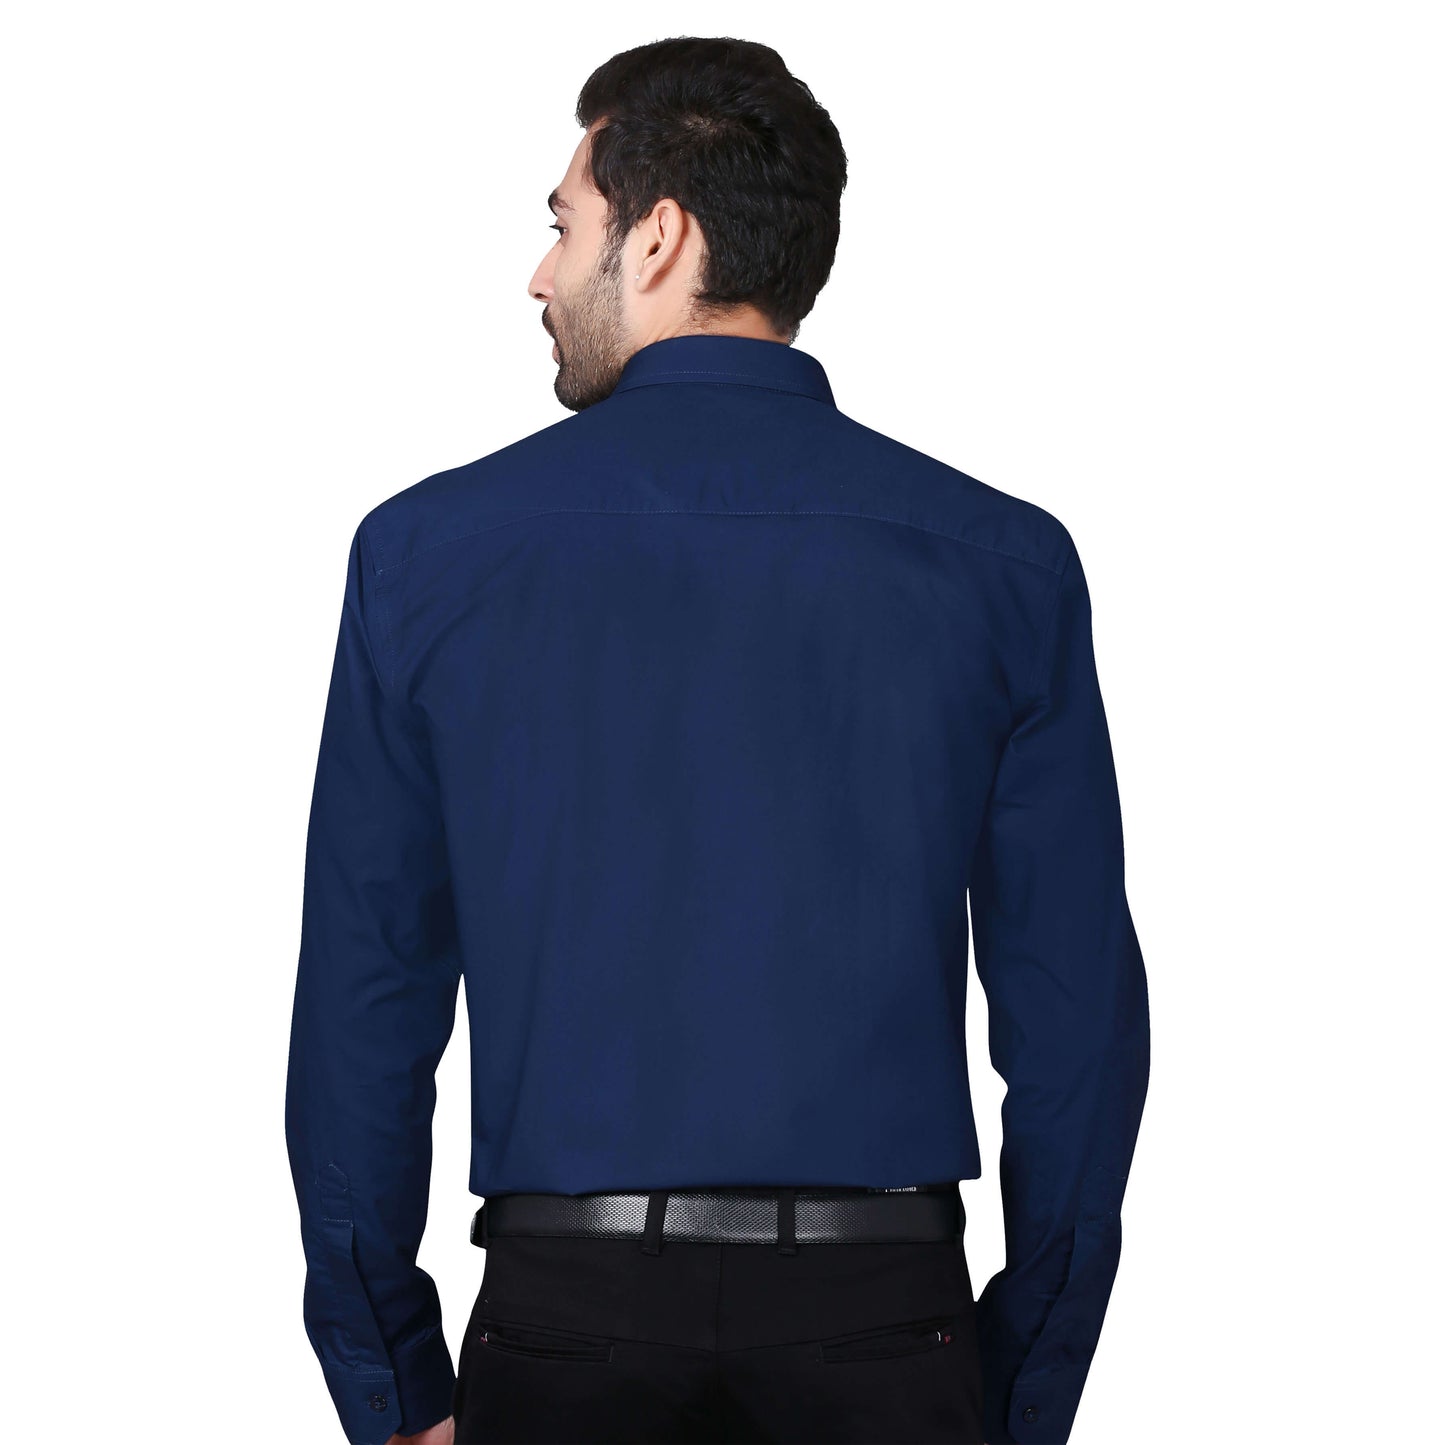 5thanfold Men's Formal Pure Cotton Full Sleeve Solid Light Navy Slim Fit Shirt